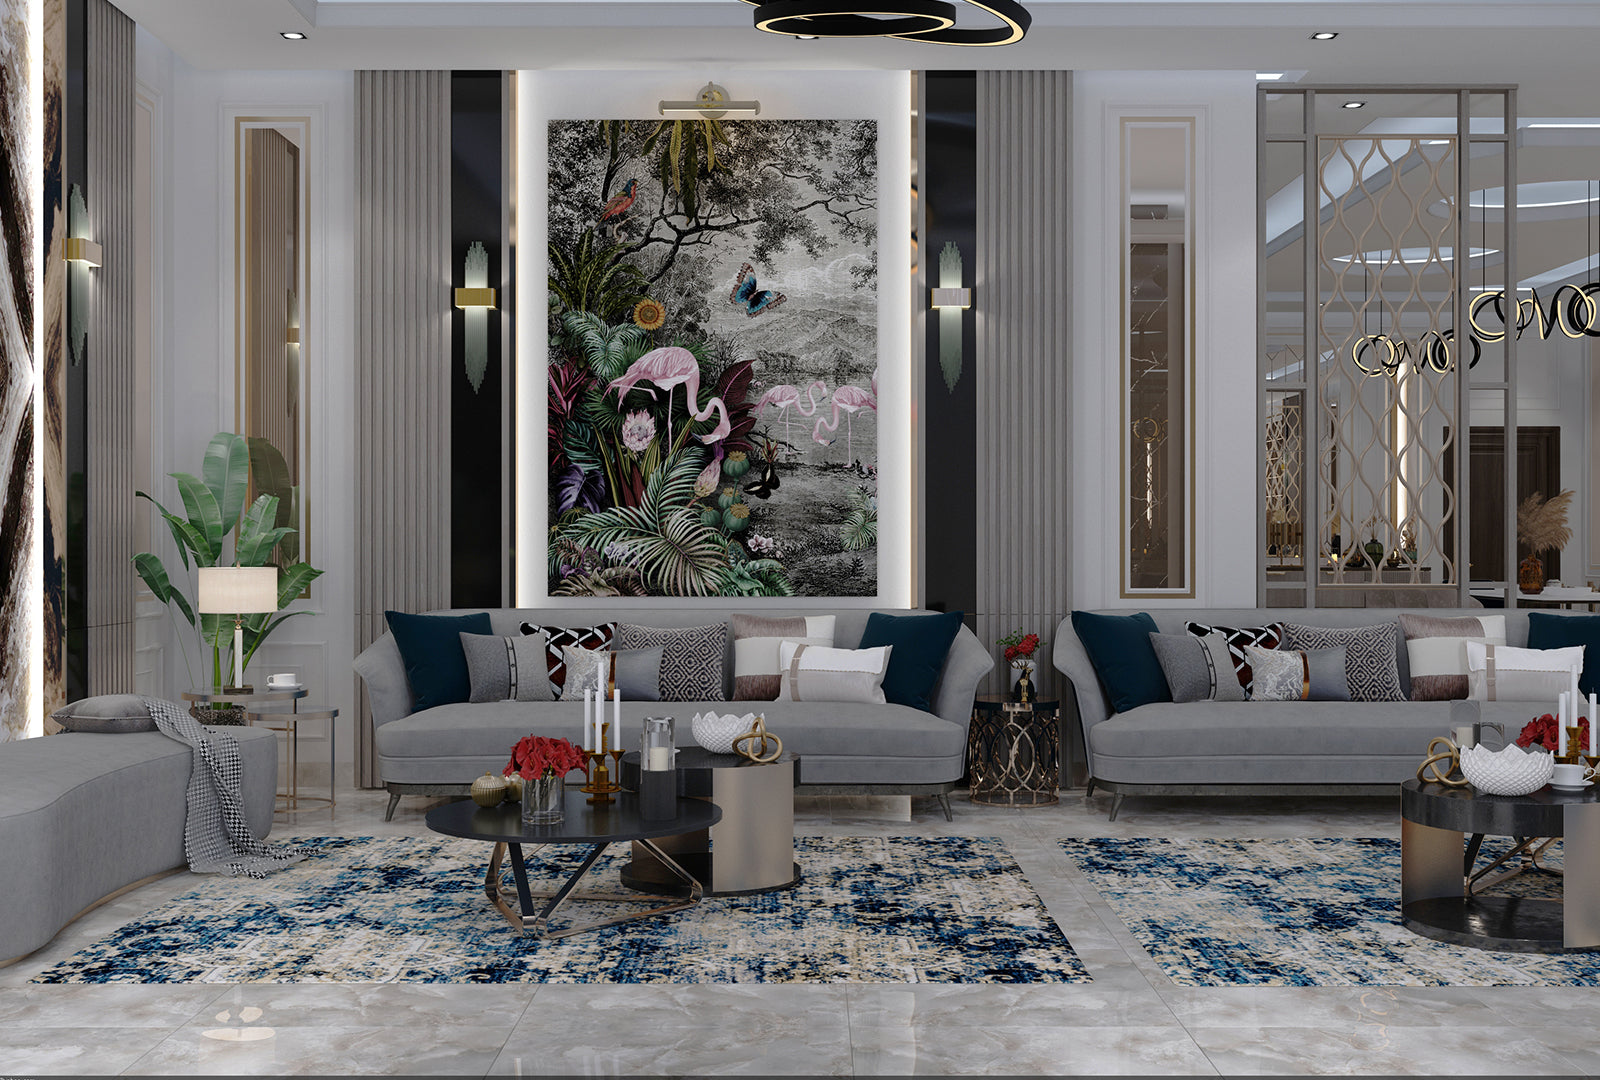 Maximalist interiors: an evolution of style